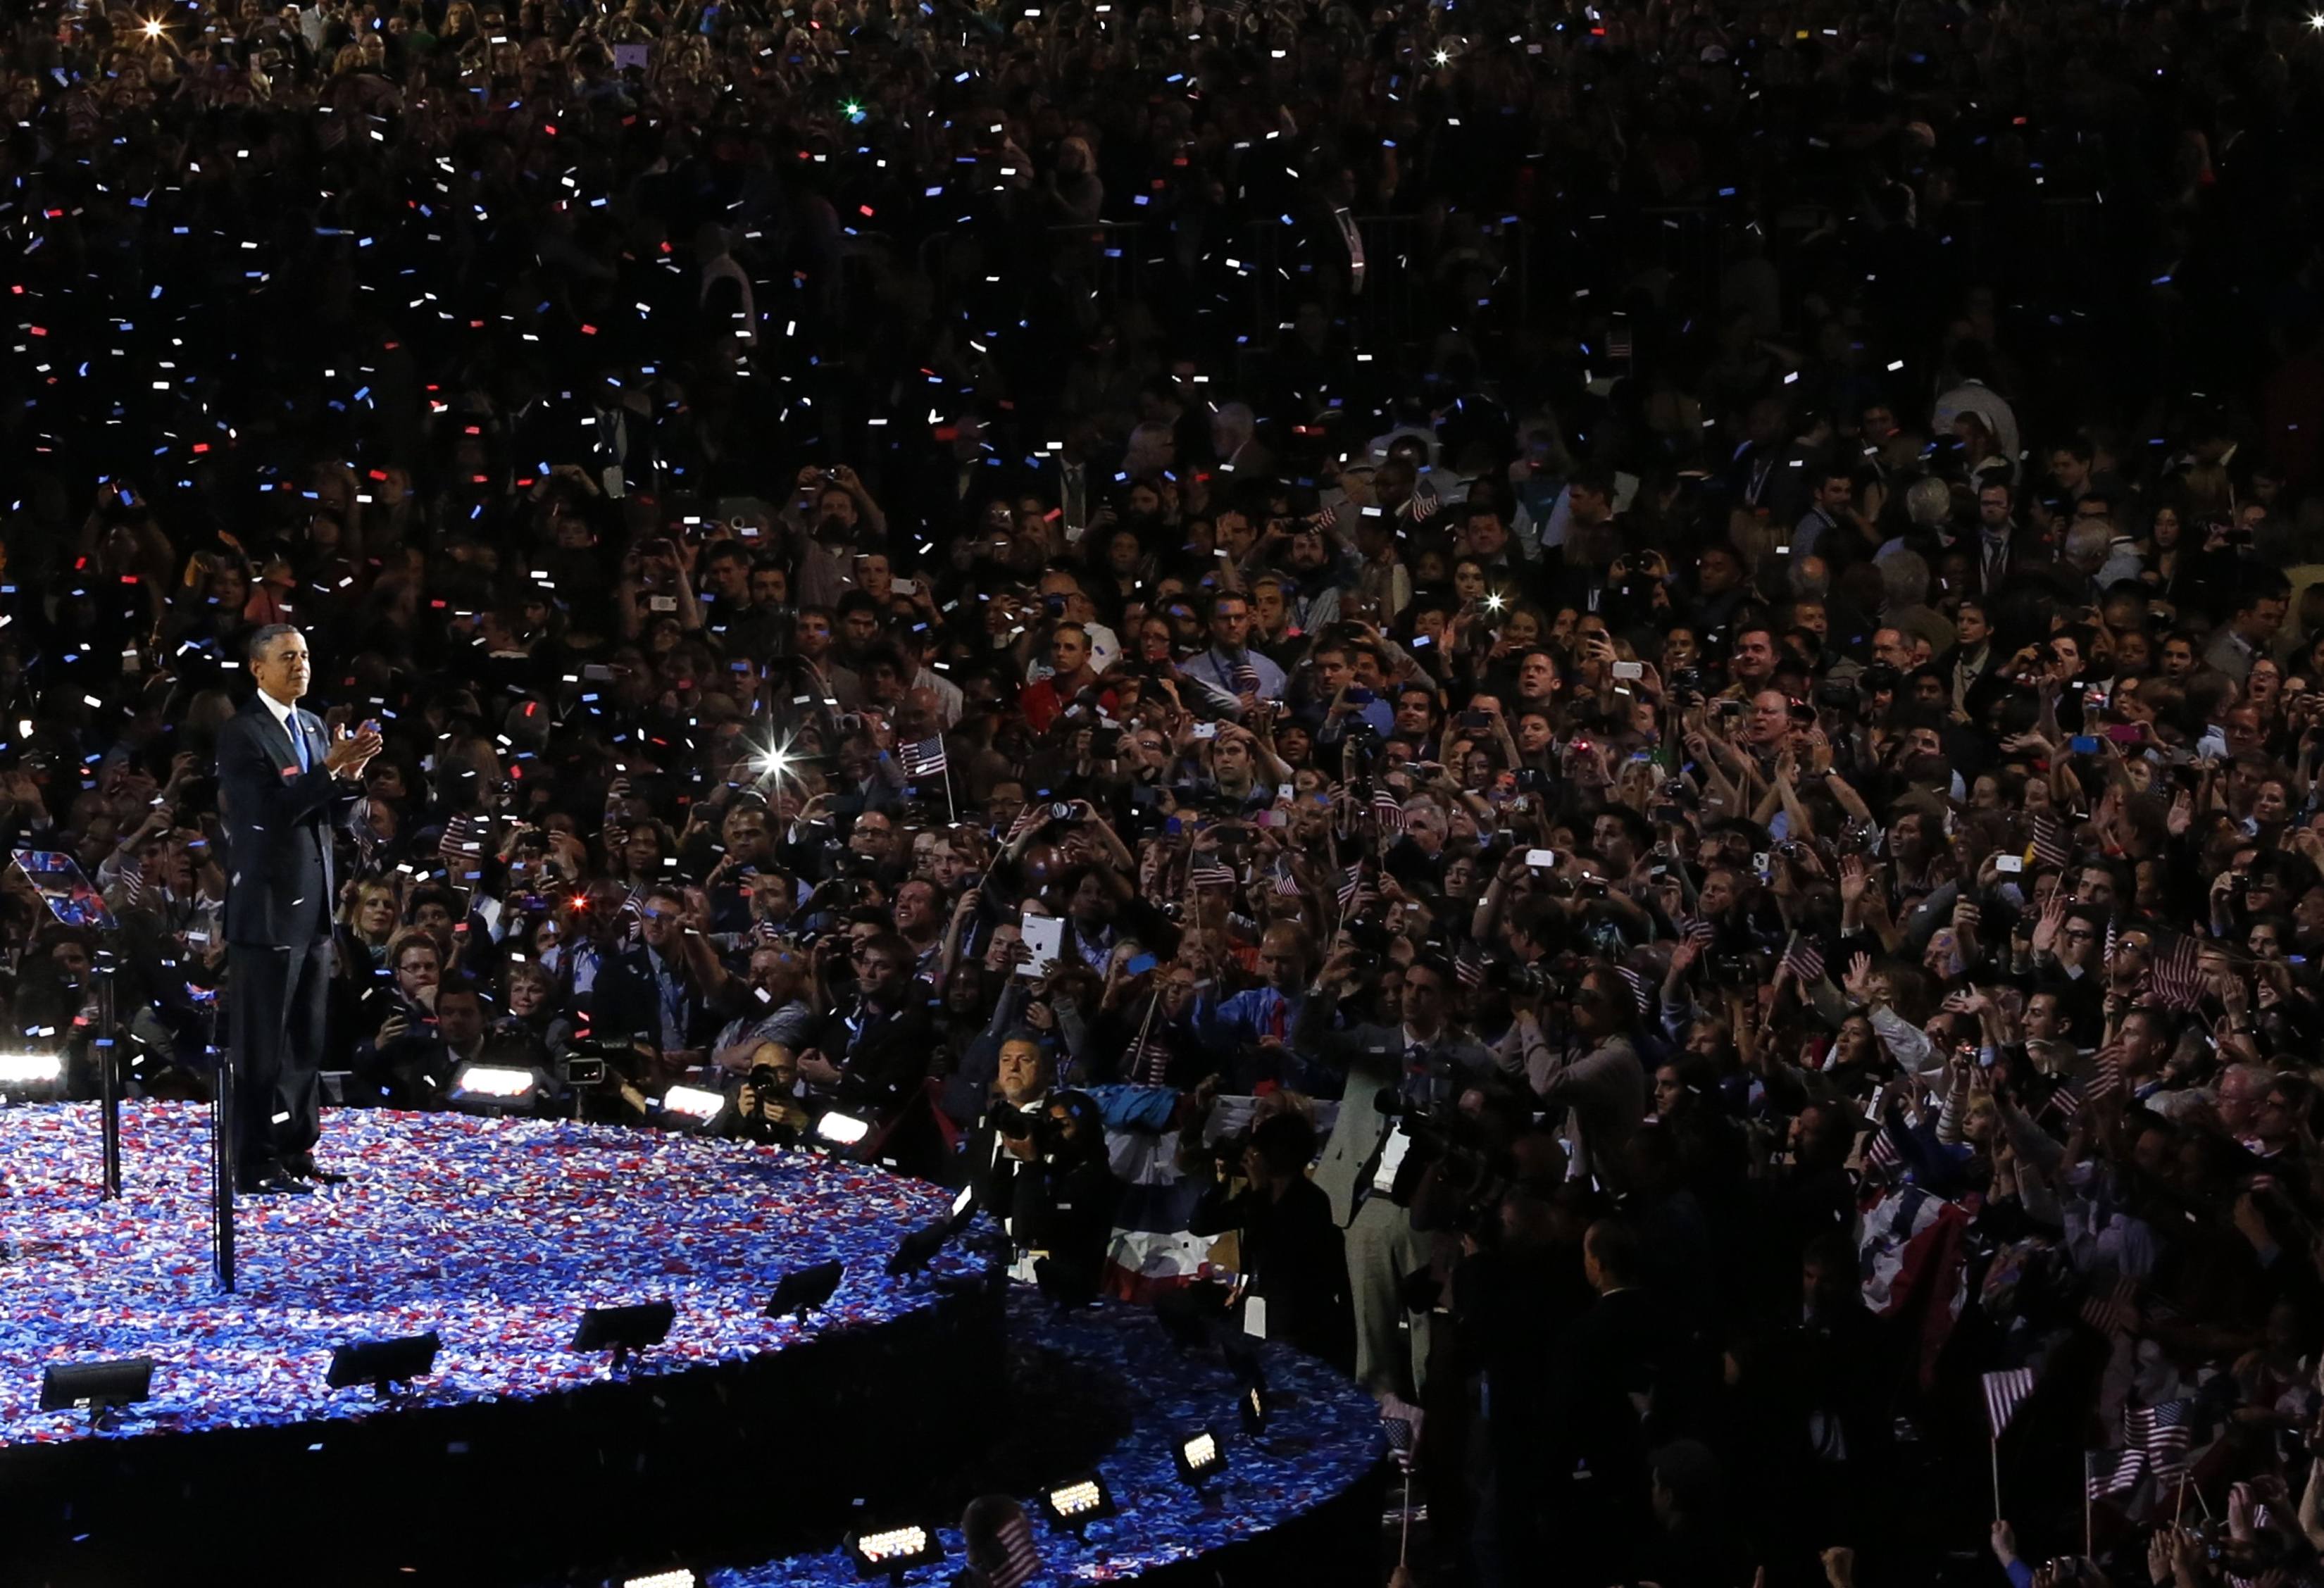 U.S. President Barack Obama applauds as he addresses supporters during his election night victory rally in Chicago